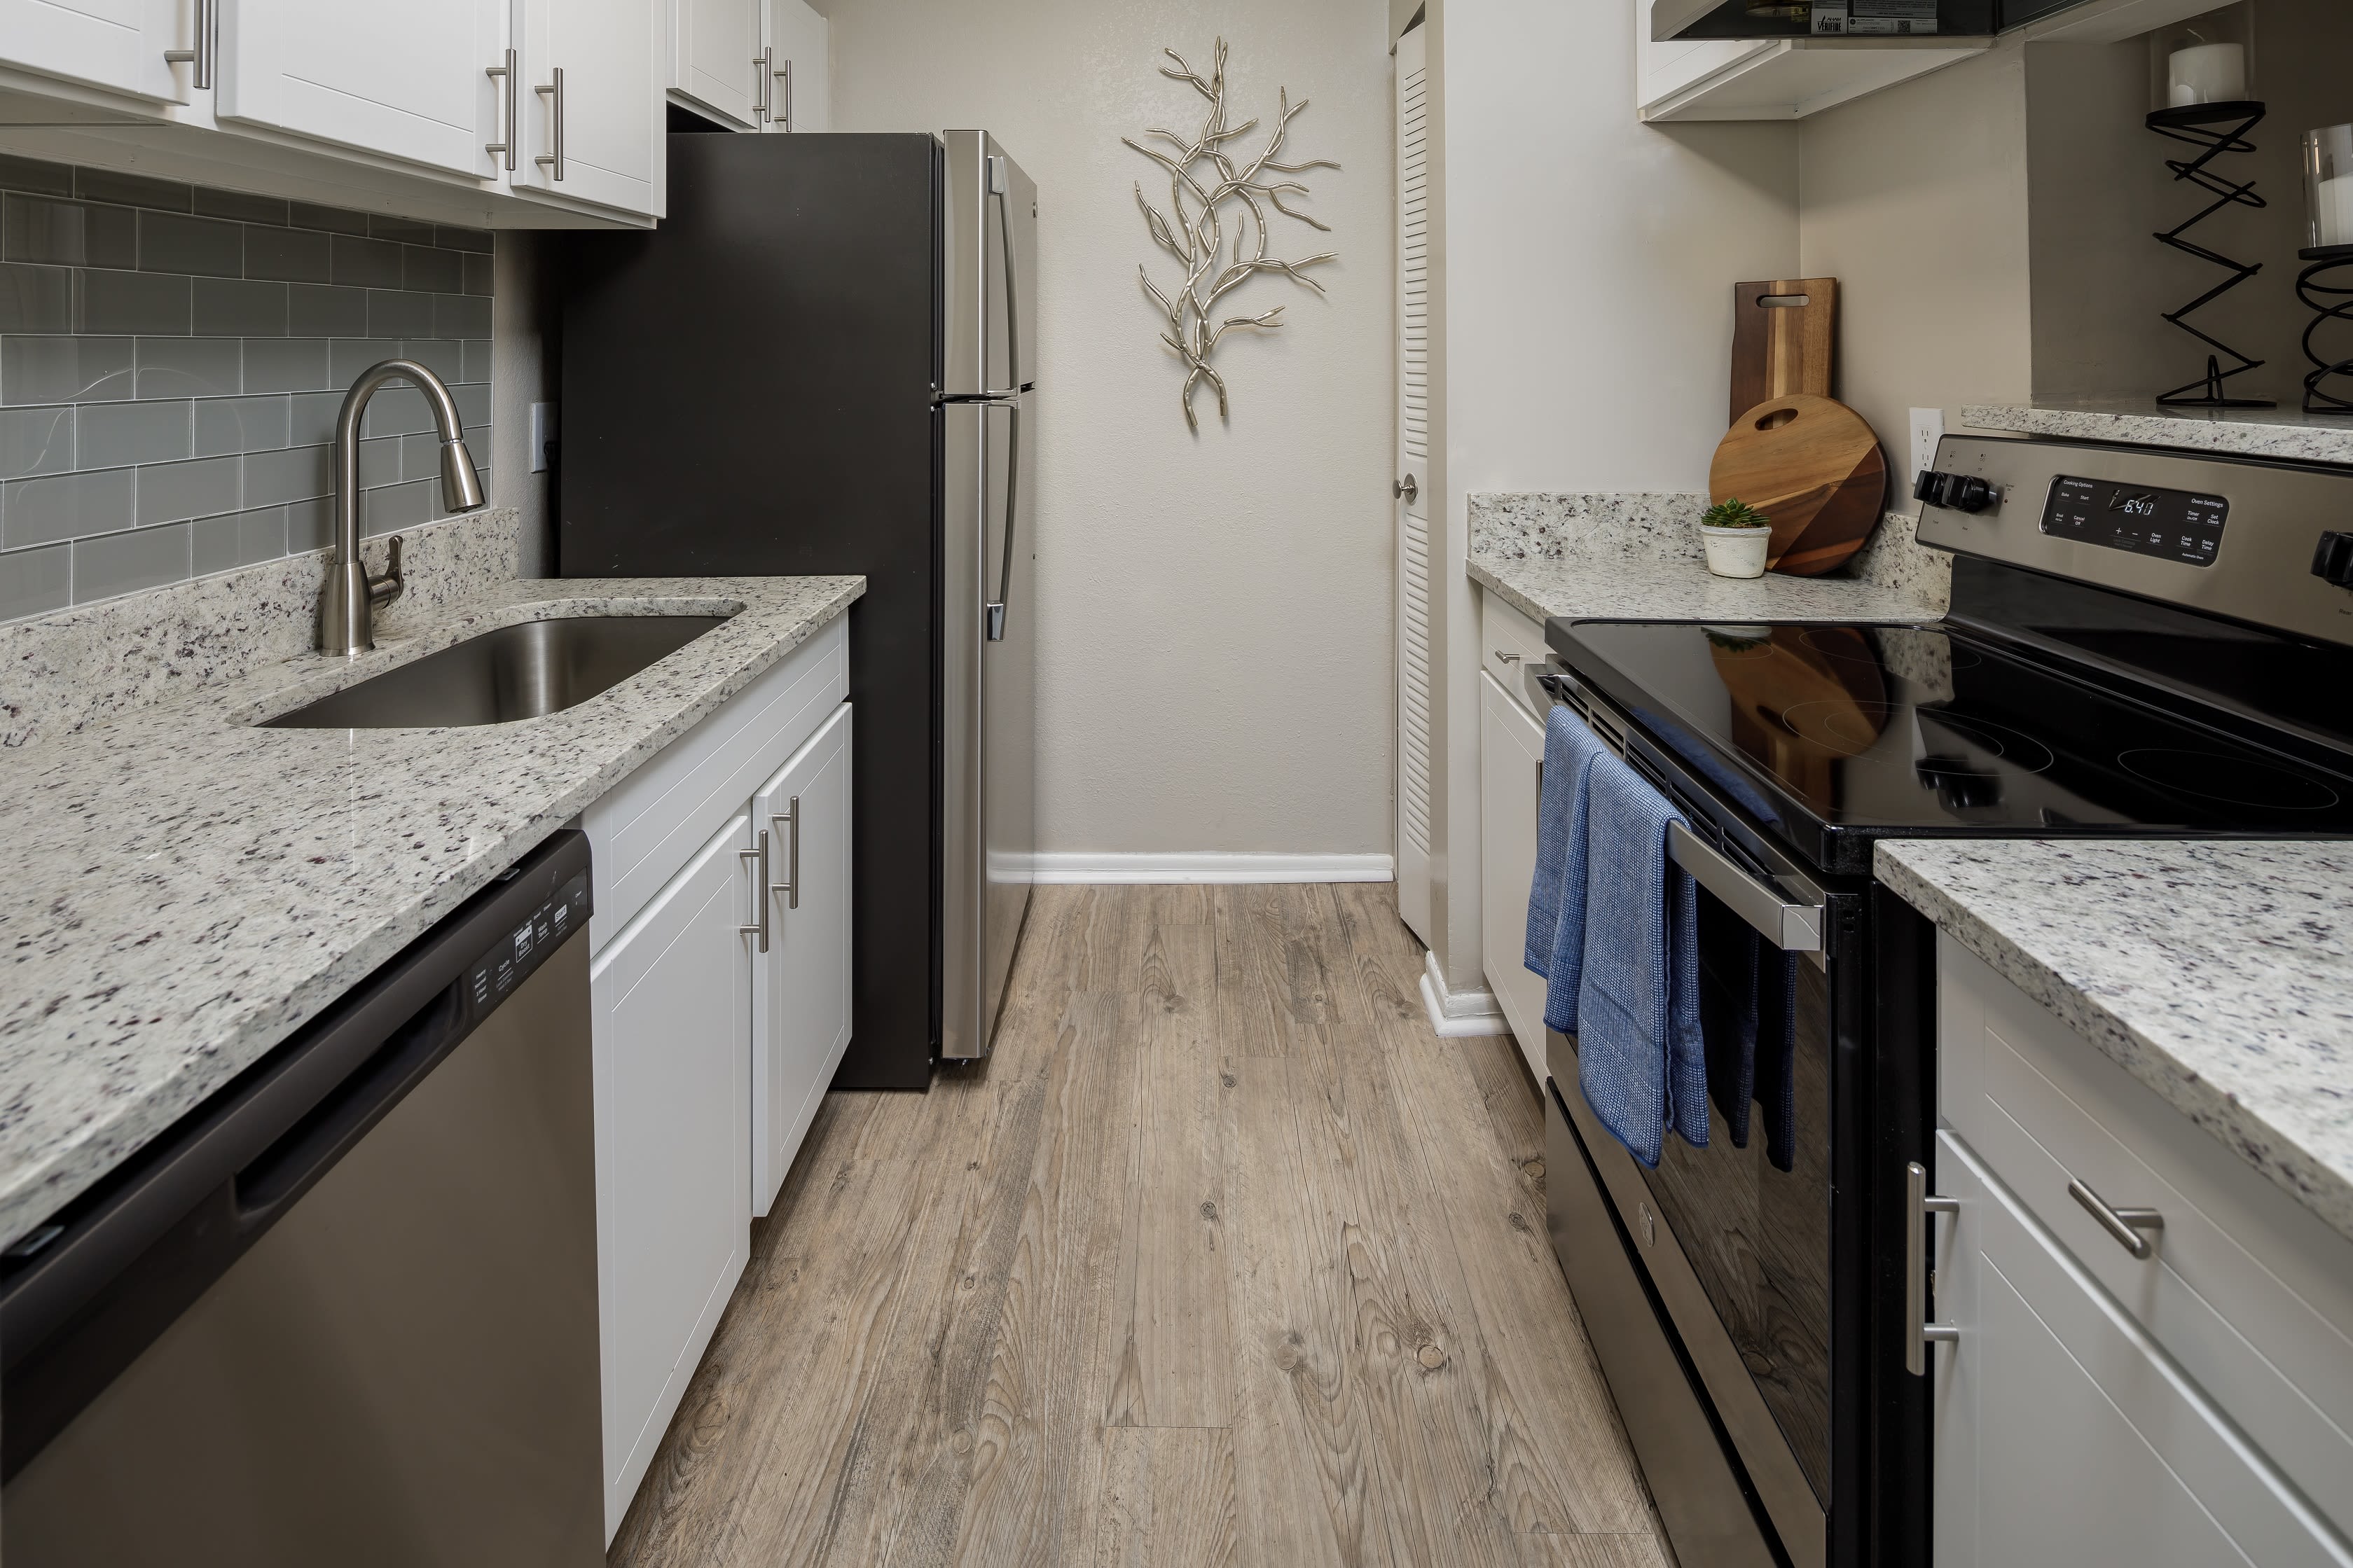 Updated appliances and countertops in a model home's kitchen at The Everette at East Cobb in Marietta, Georgia